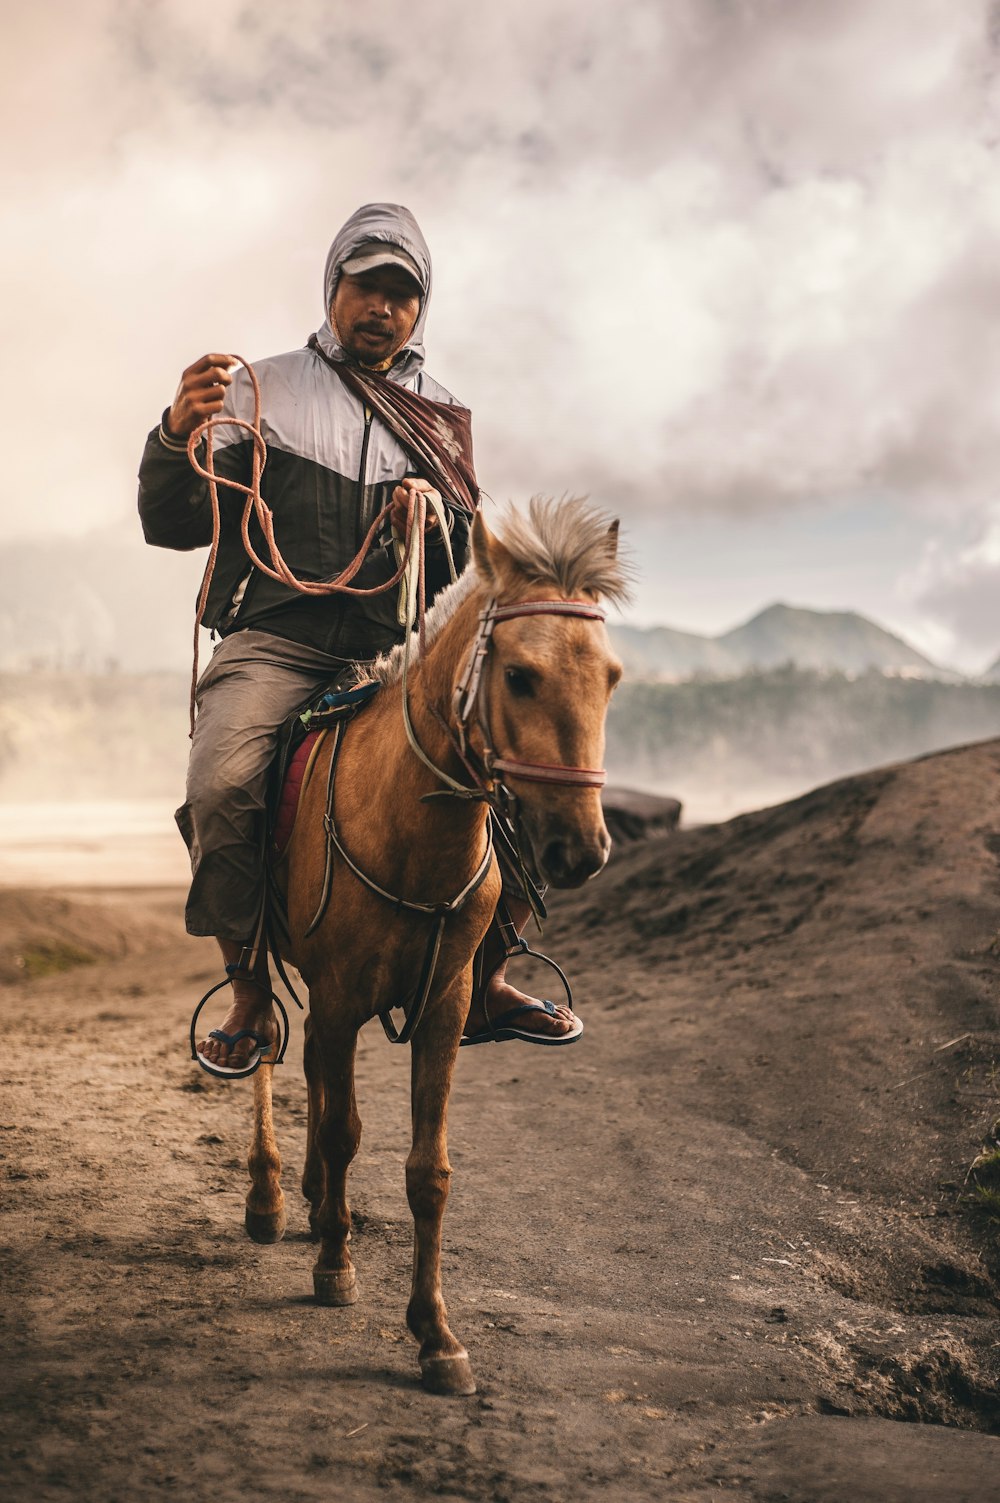 man riding horse under cloudy skies